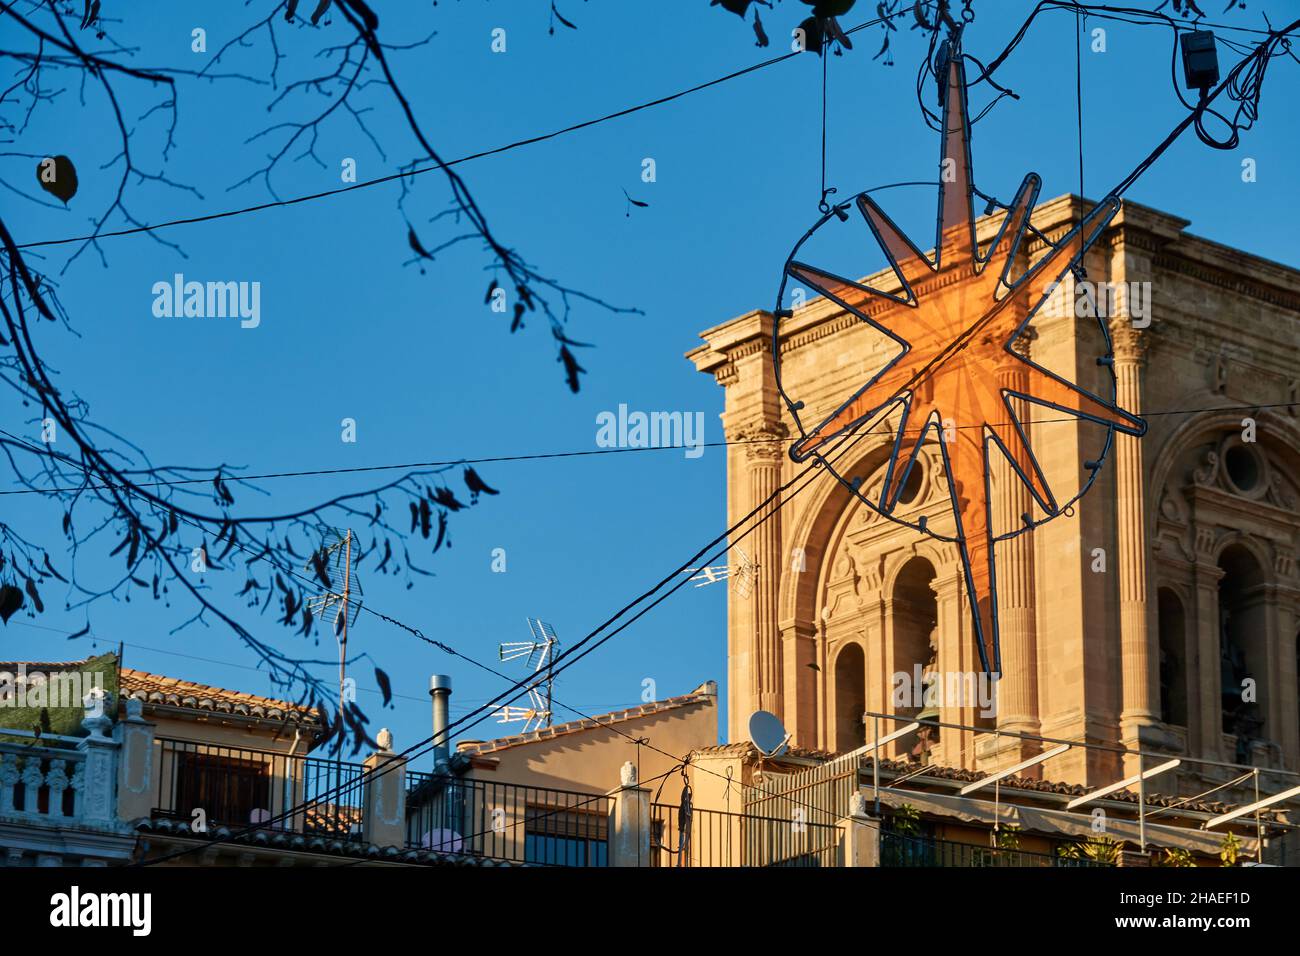 A walk in Granada: Plaza Bibrambla decorated with Christmas lighting with the cathedral in the background on a winter sunset Stock Photo